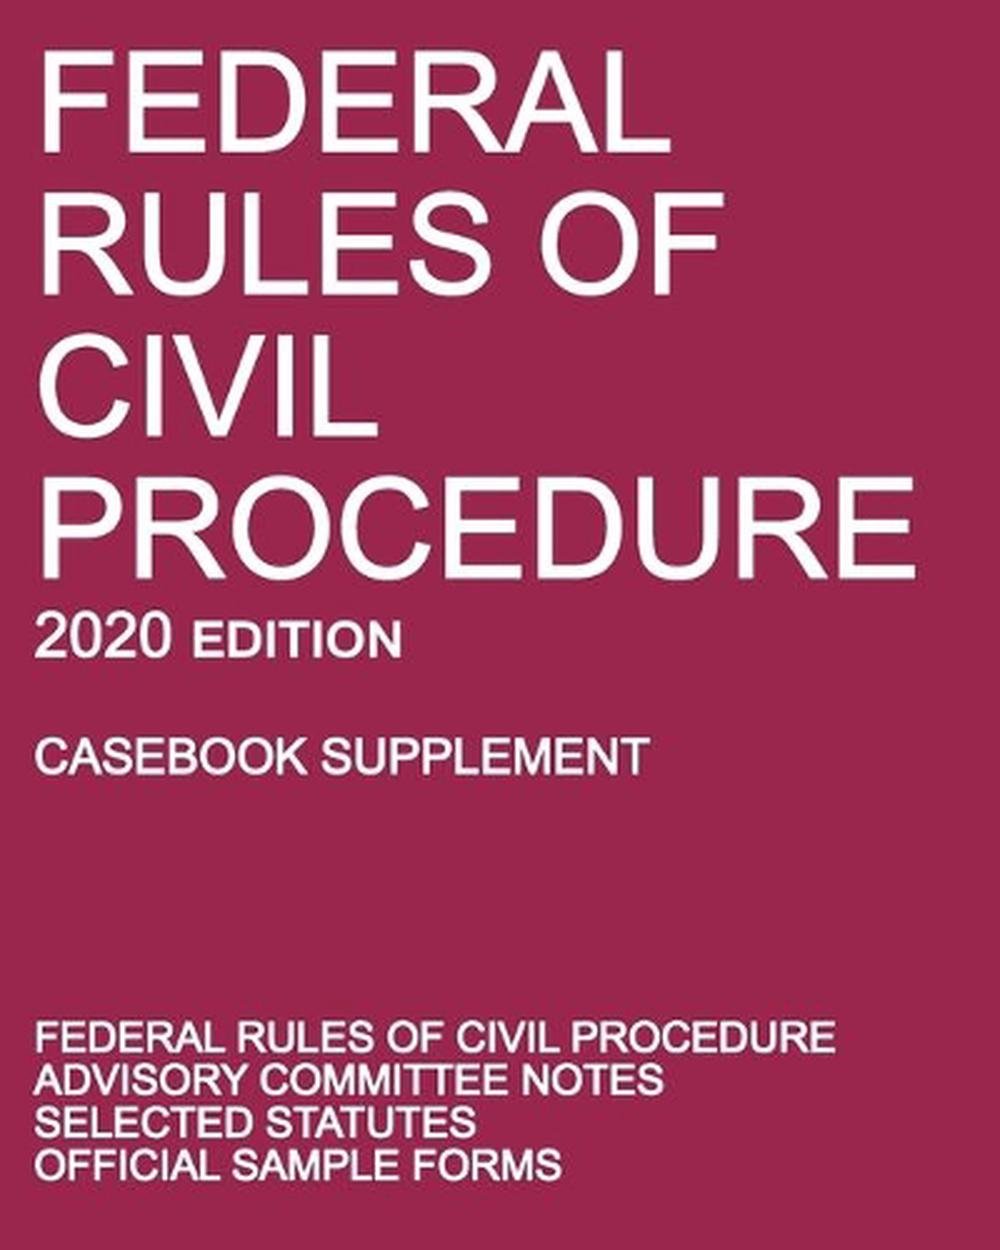 Federal Rules of Civil Procedure; 2020 Edition (Casebook Supplement